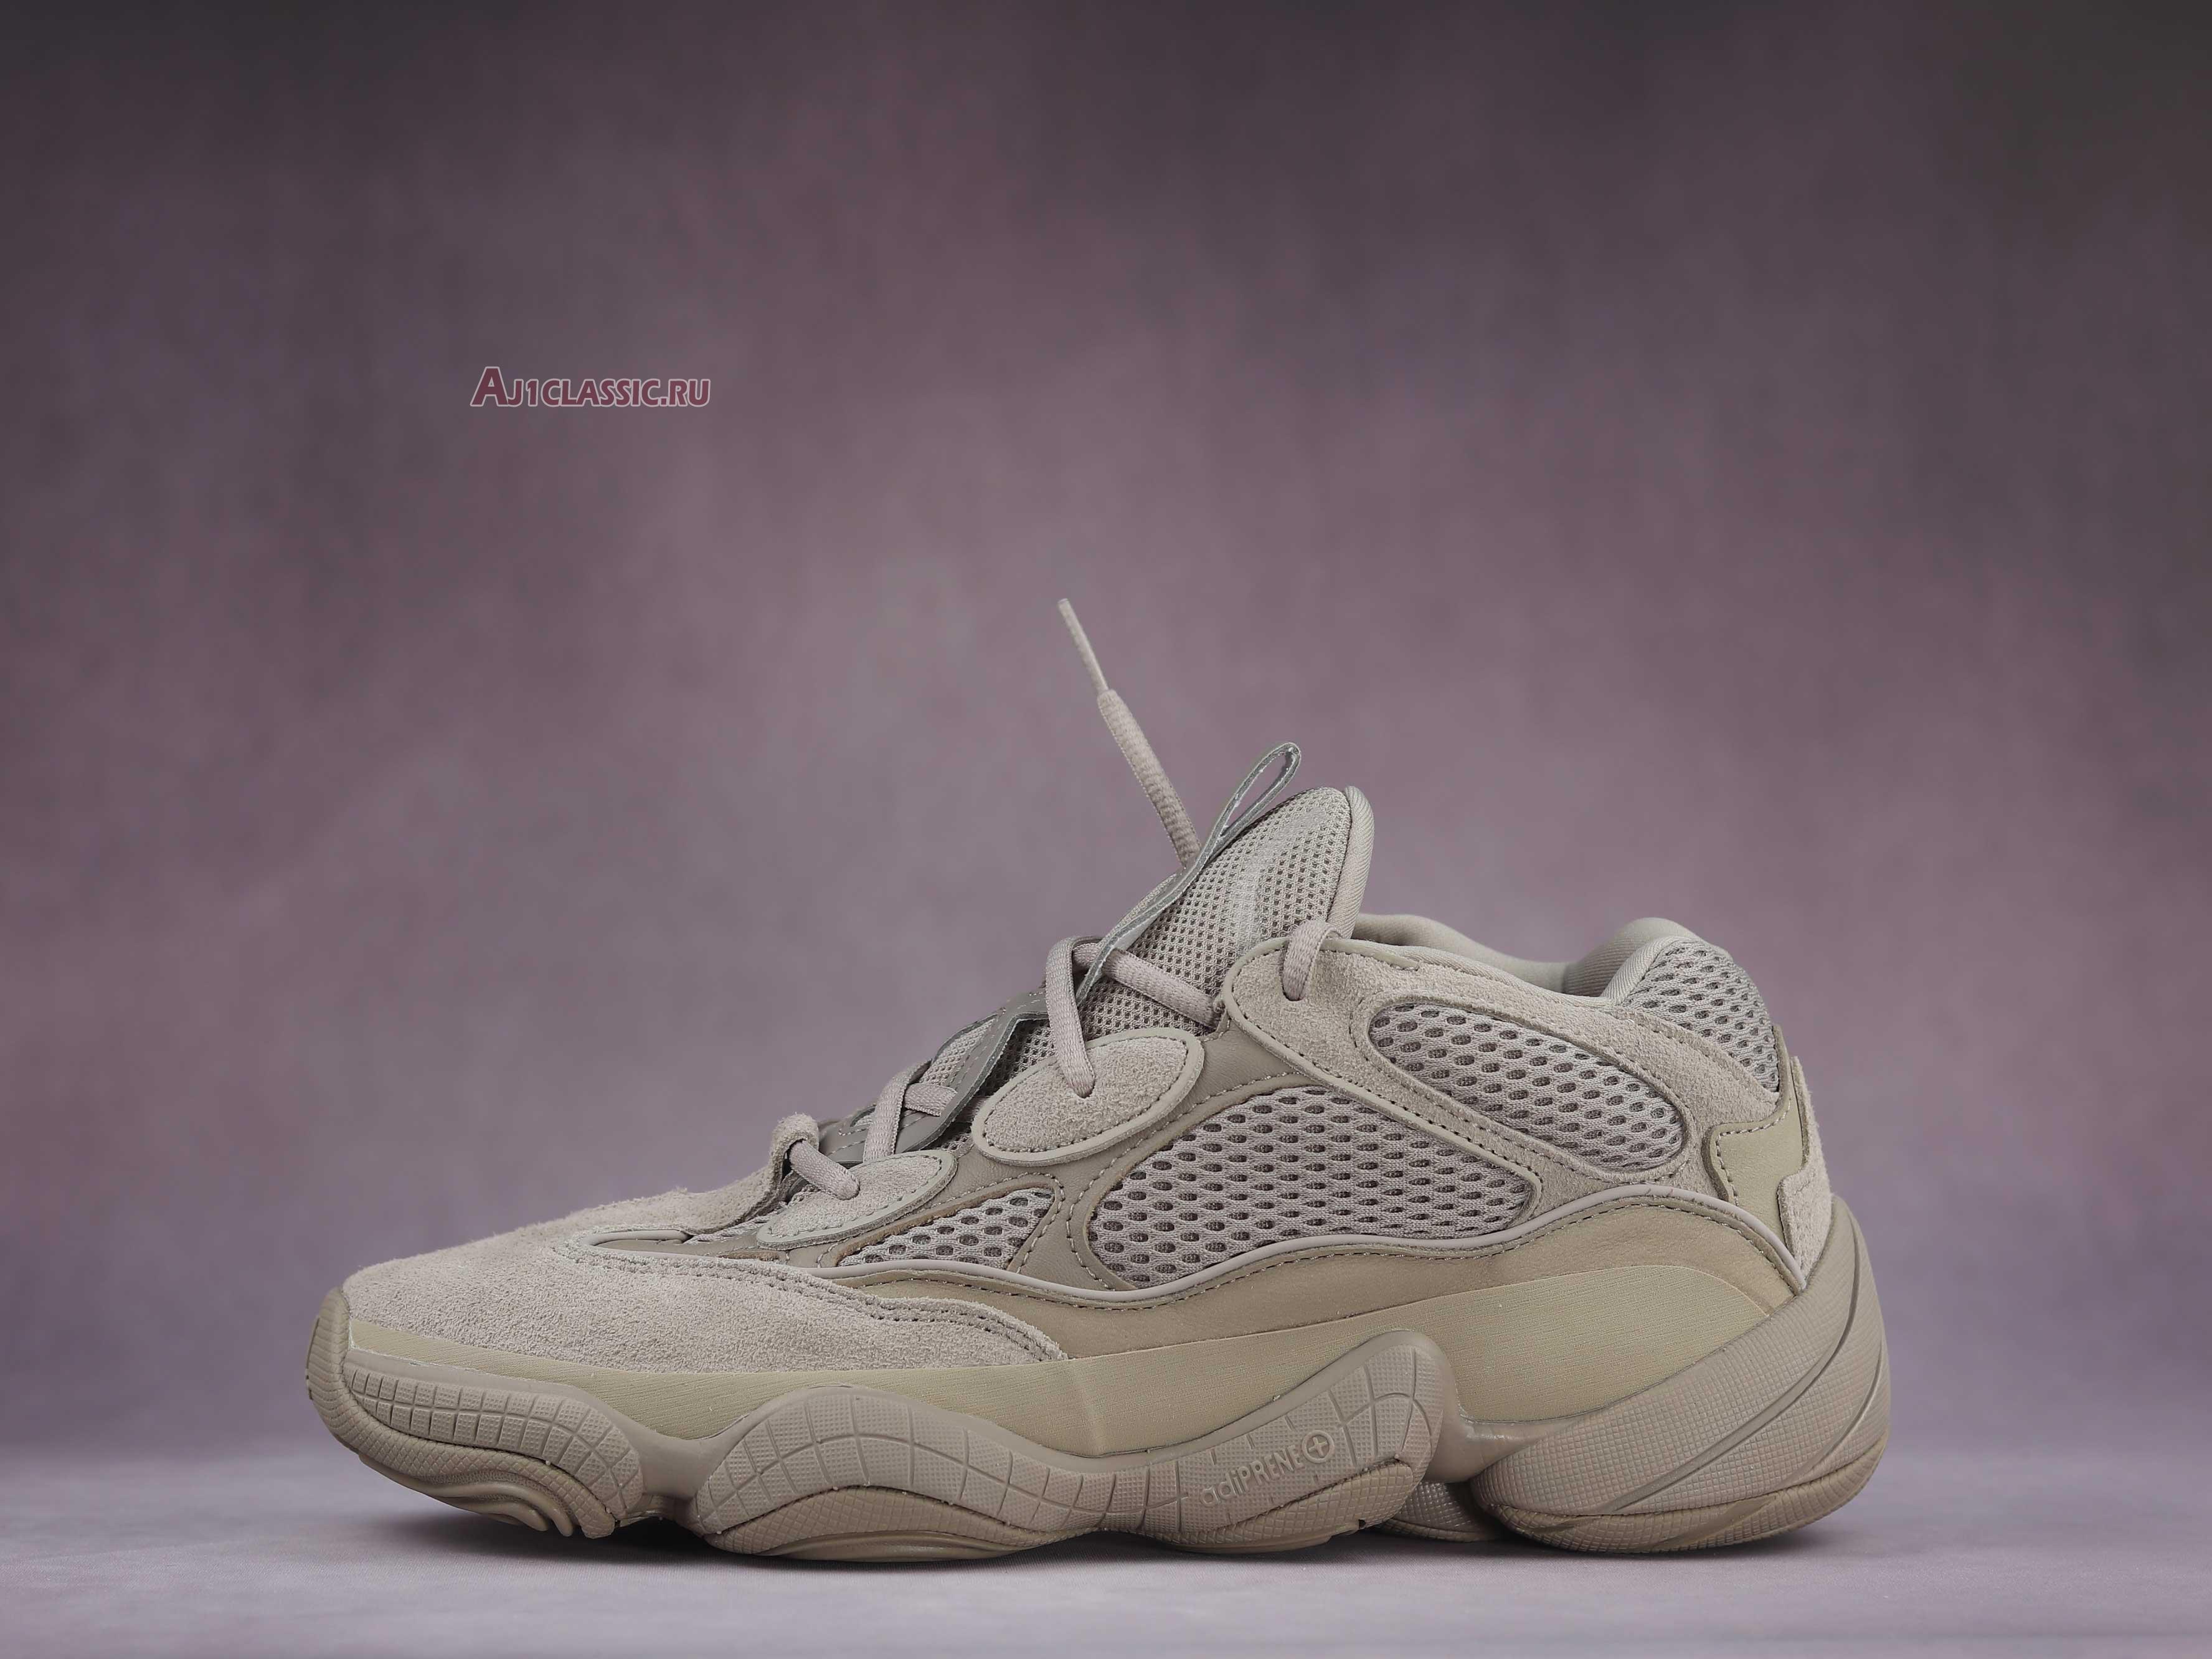 Adidas Yeezy 500 Taupe Light GX3605 Taupe Light/Taupe Light/Taupe Light Sneakers